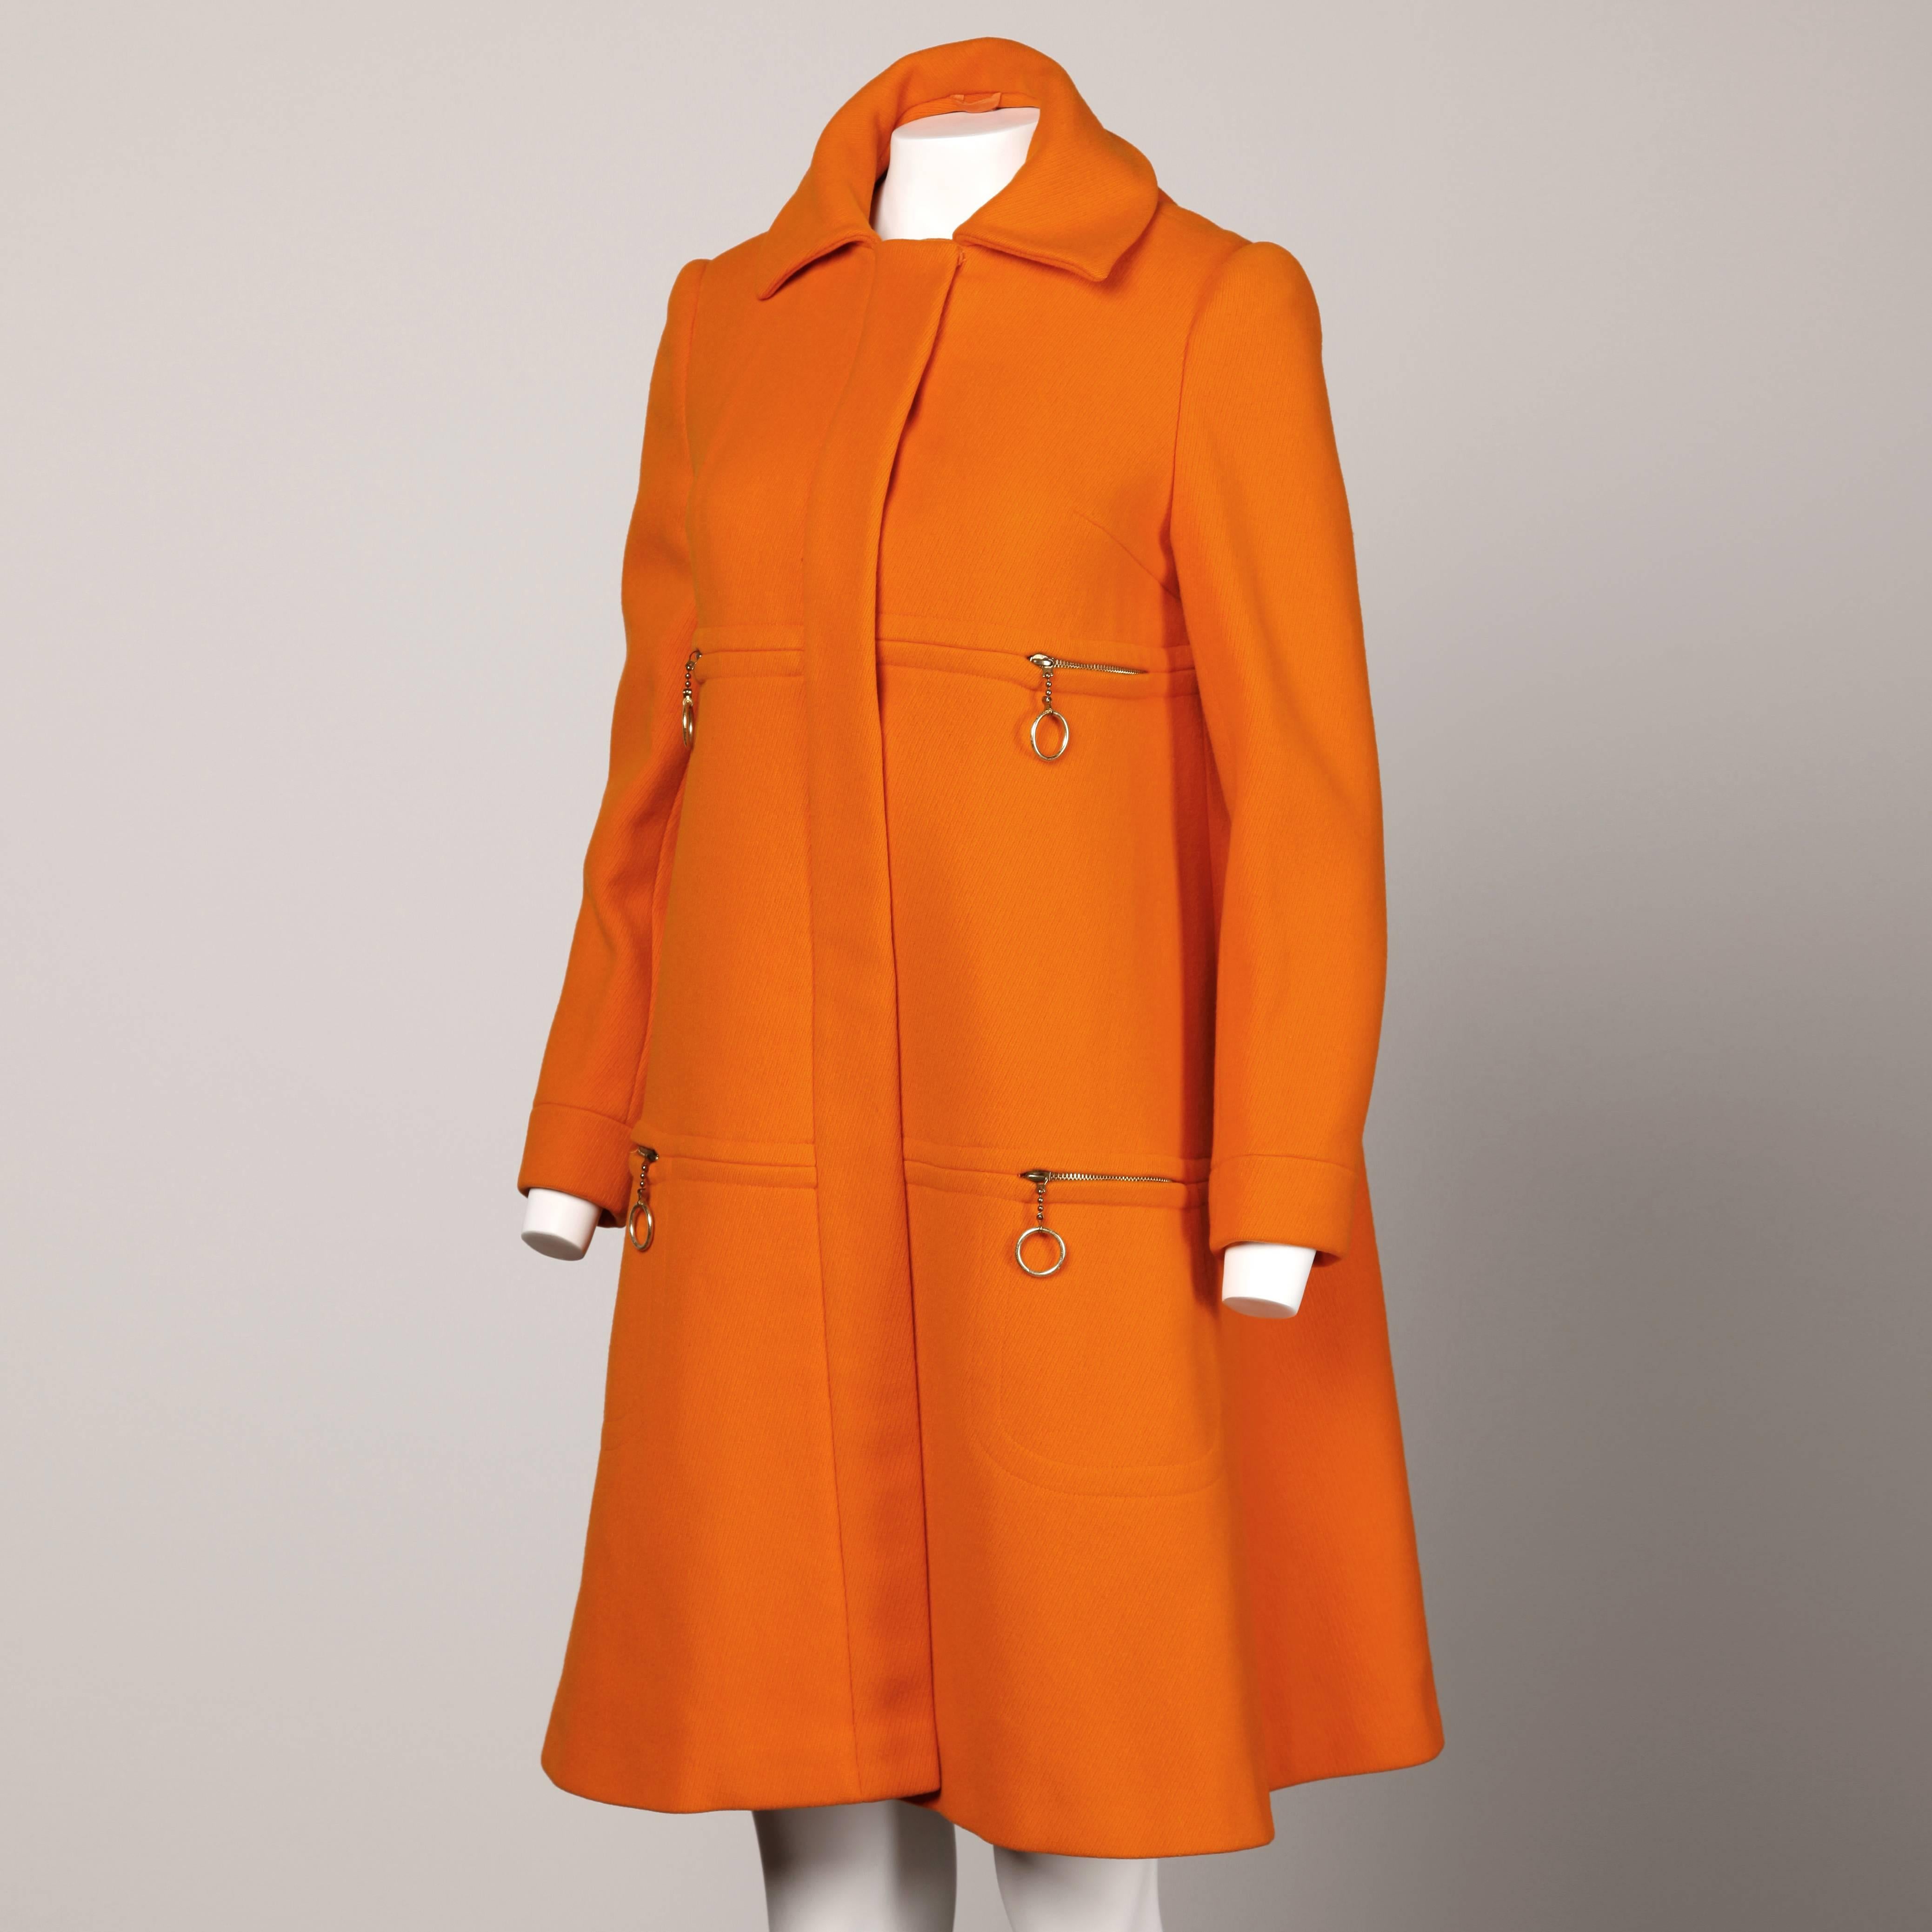 Iconic vintage 1960s bright orange wool trapeze coat by Mary Quant's The Ginger Group. Huge sweep and zippered pockets with ultra mod ring pulls. Beautiful top stitching and 1960s silhouette. Fully lined. 100% wool. Hidden front button closure. Will